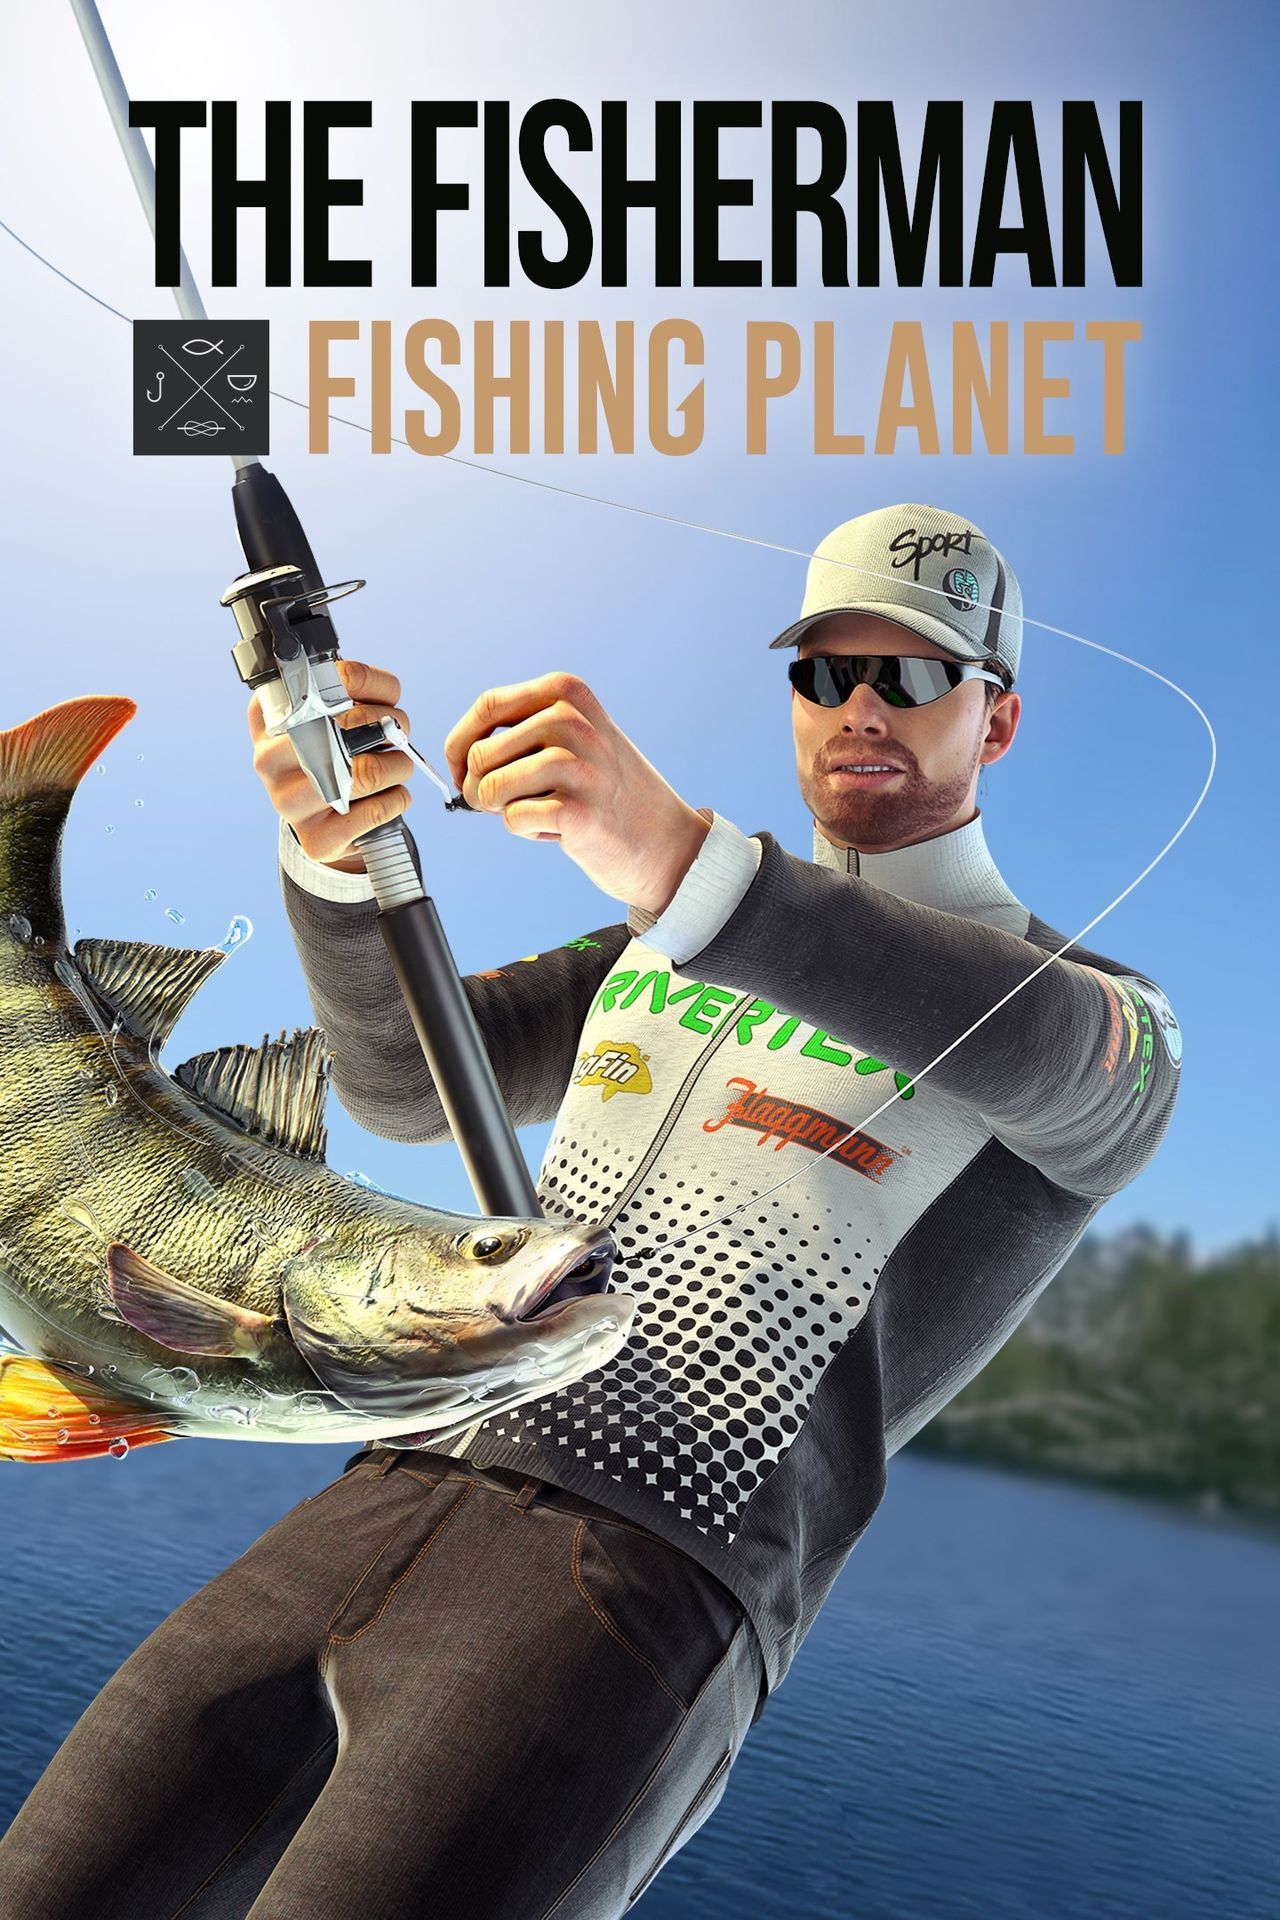 cyber monday deals a fisherman fishing planet xbox one